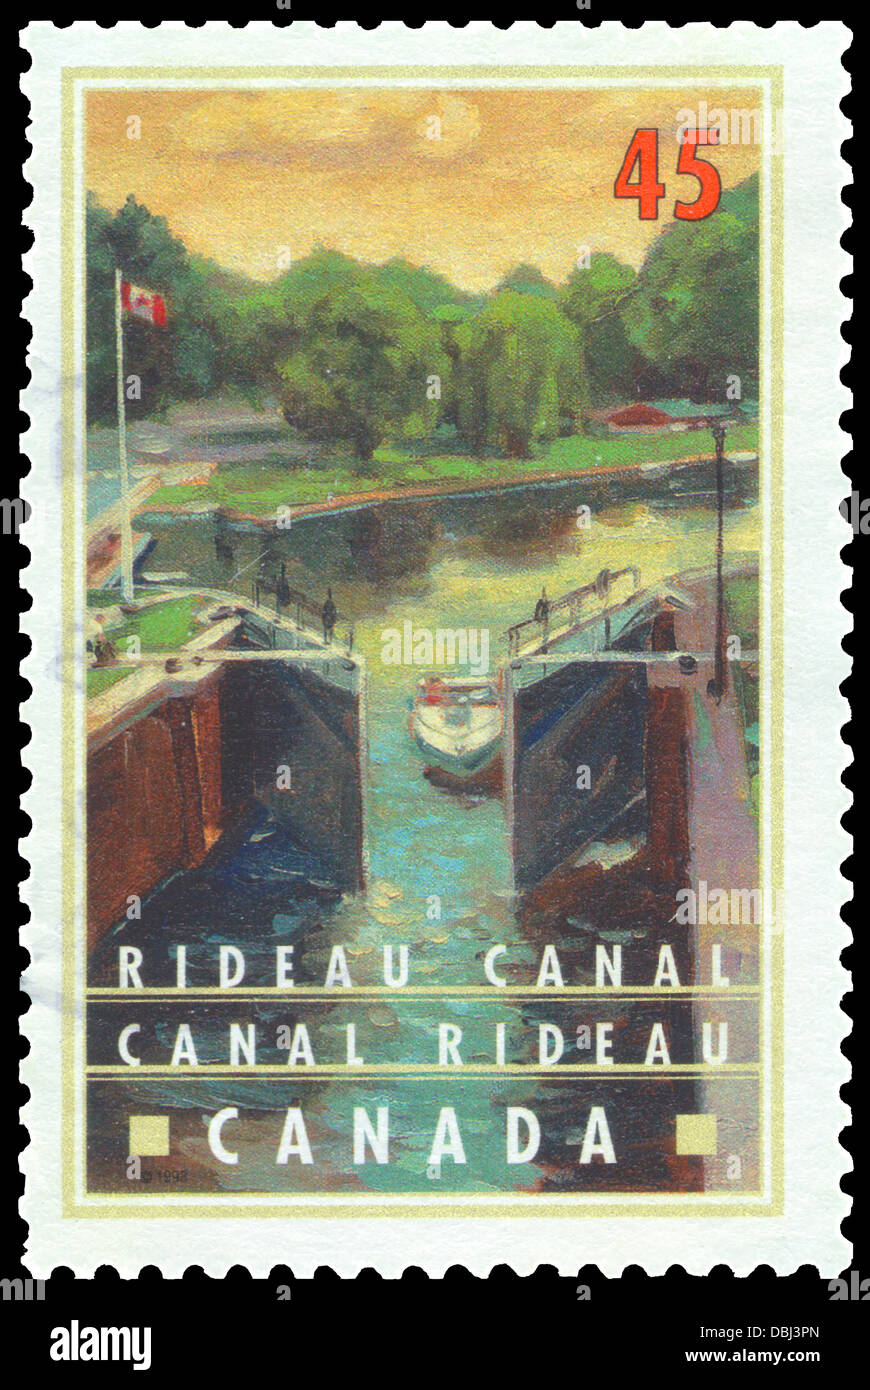 A canceled Canadian postage stamp featuring the Rideau Canal World Heritage Site, an historic operating canal in continuous use Stock Photo